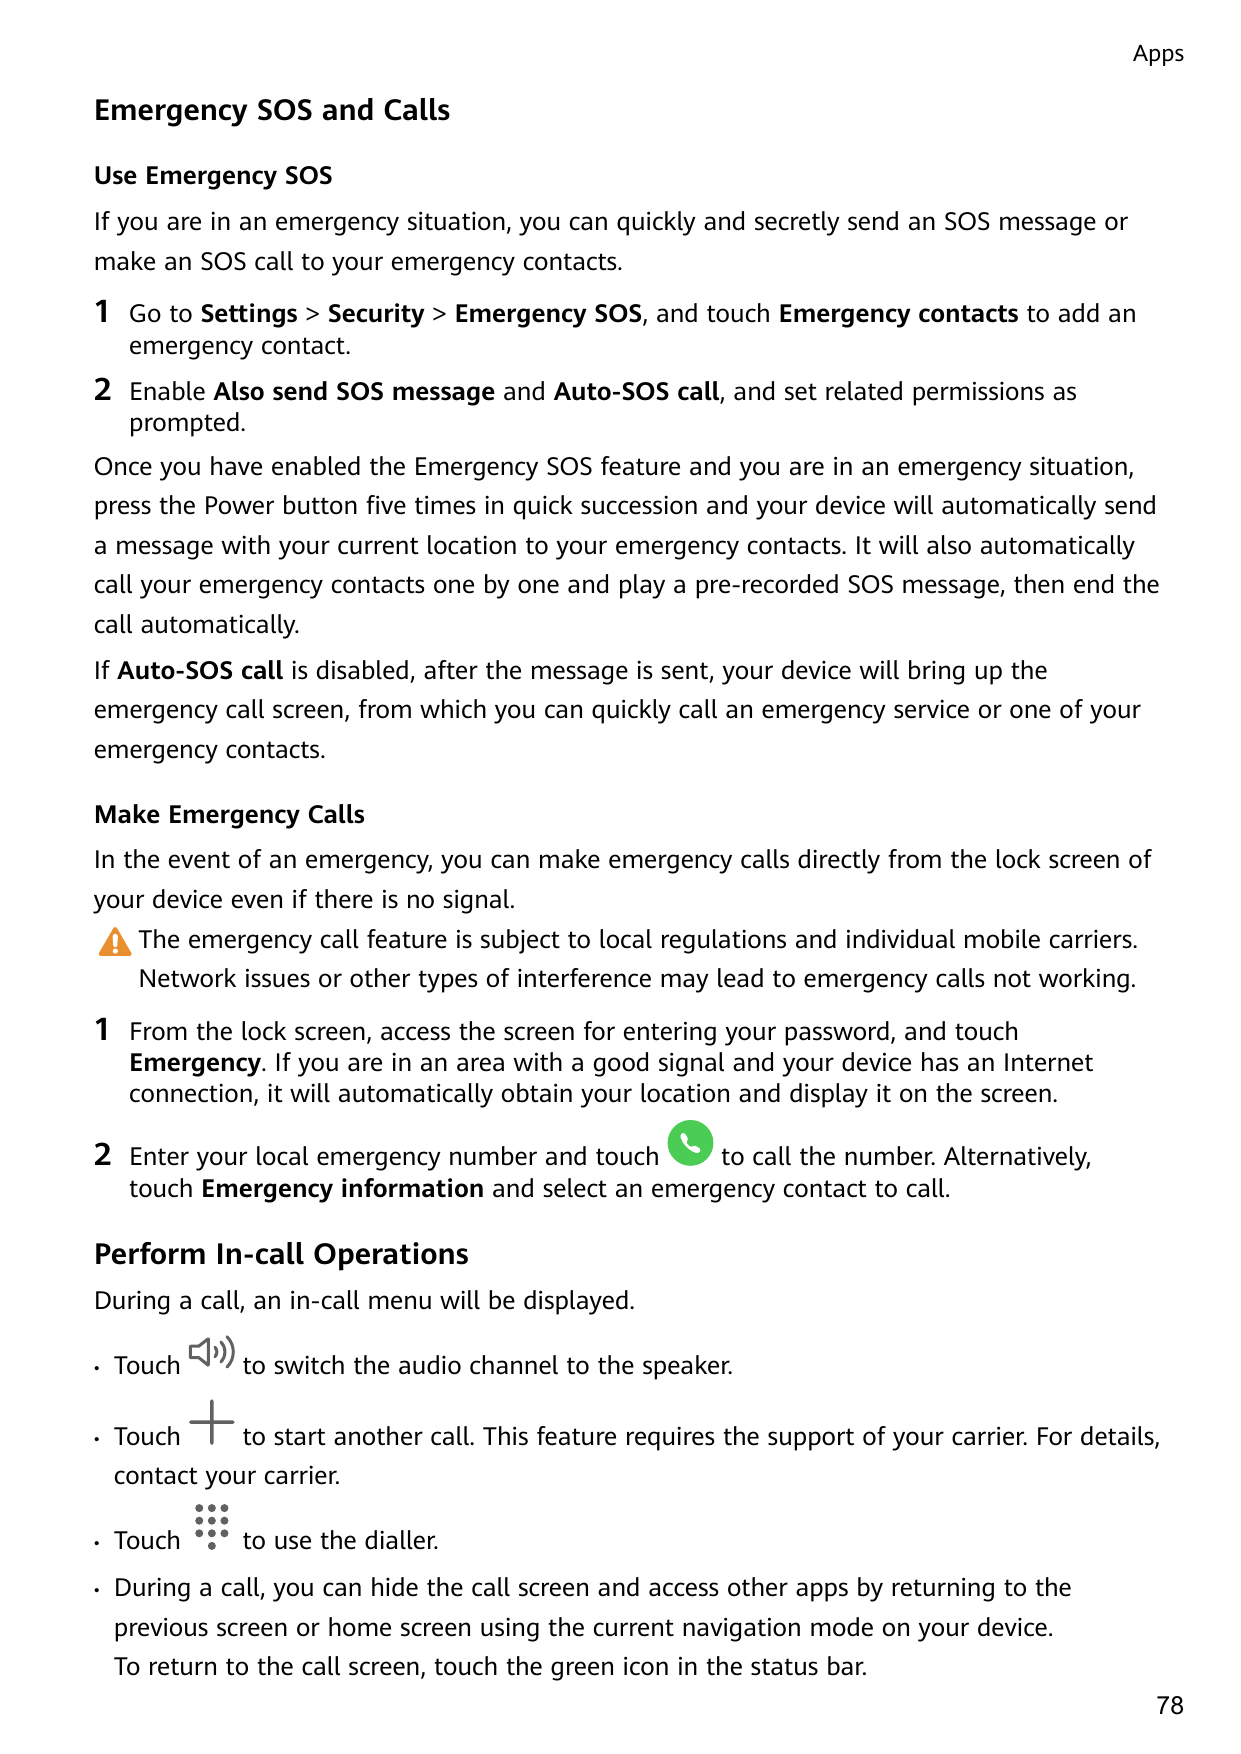 AppsEmergency SOS and CallsUse Emergency SOSIf you are in an emergency situation, you can quickly and secretly send an SOS messa